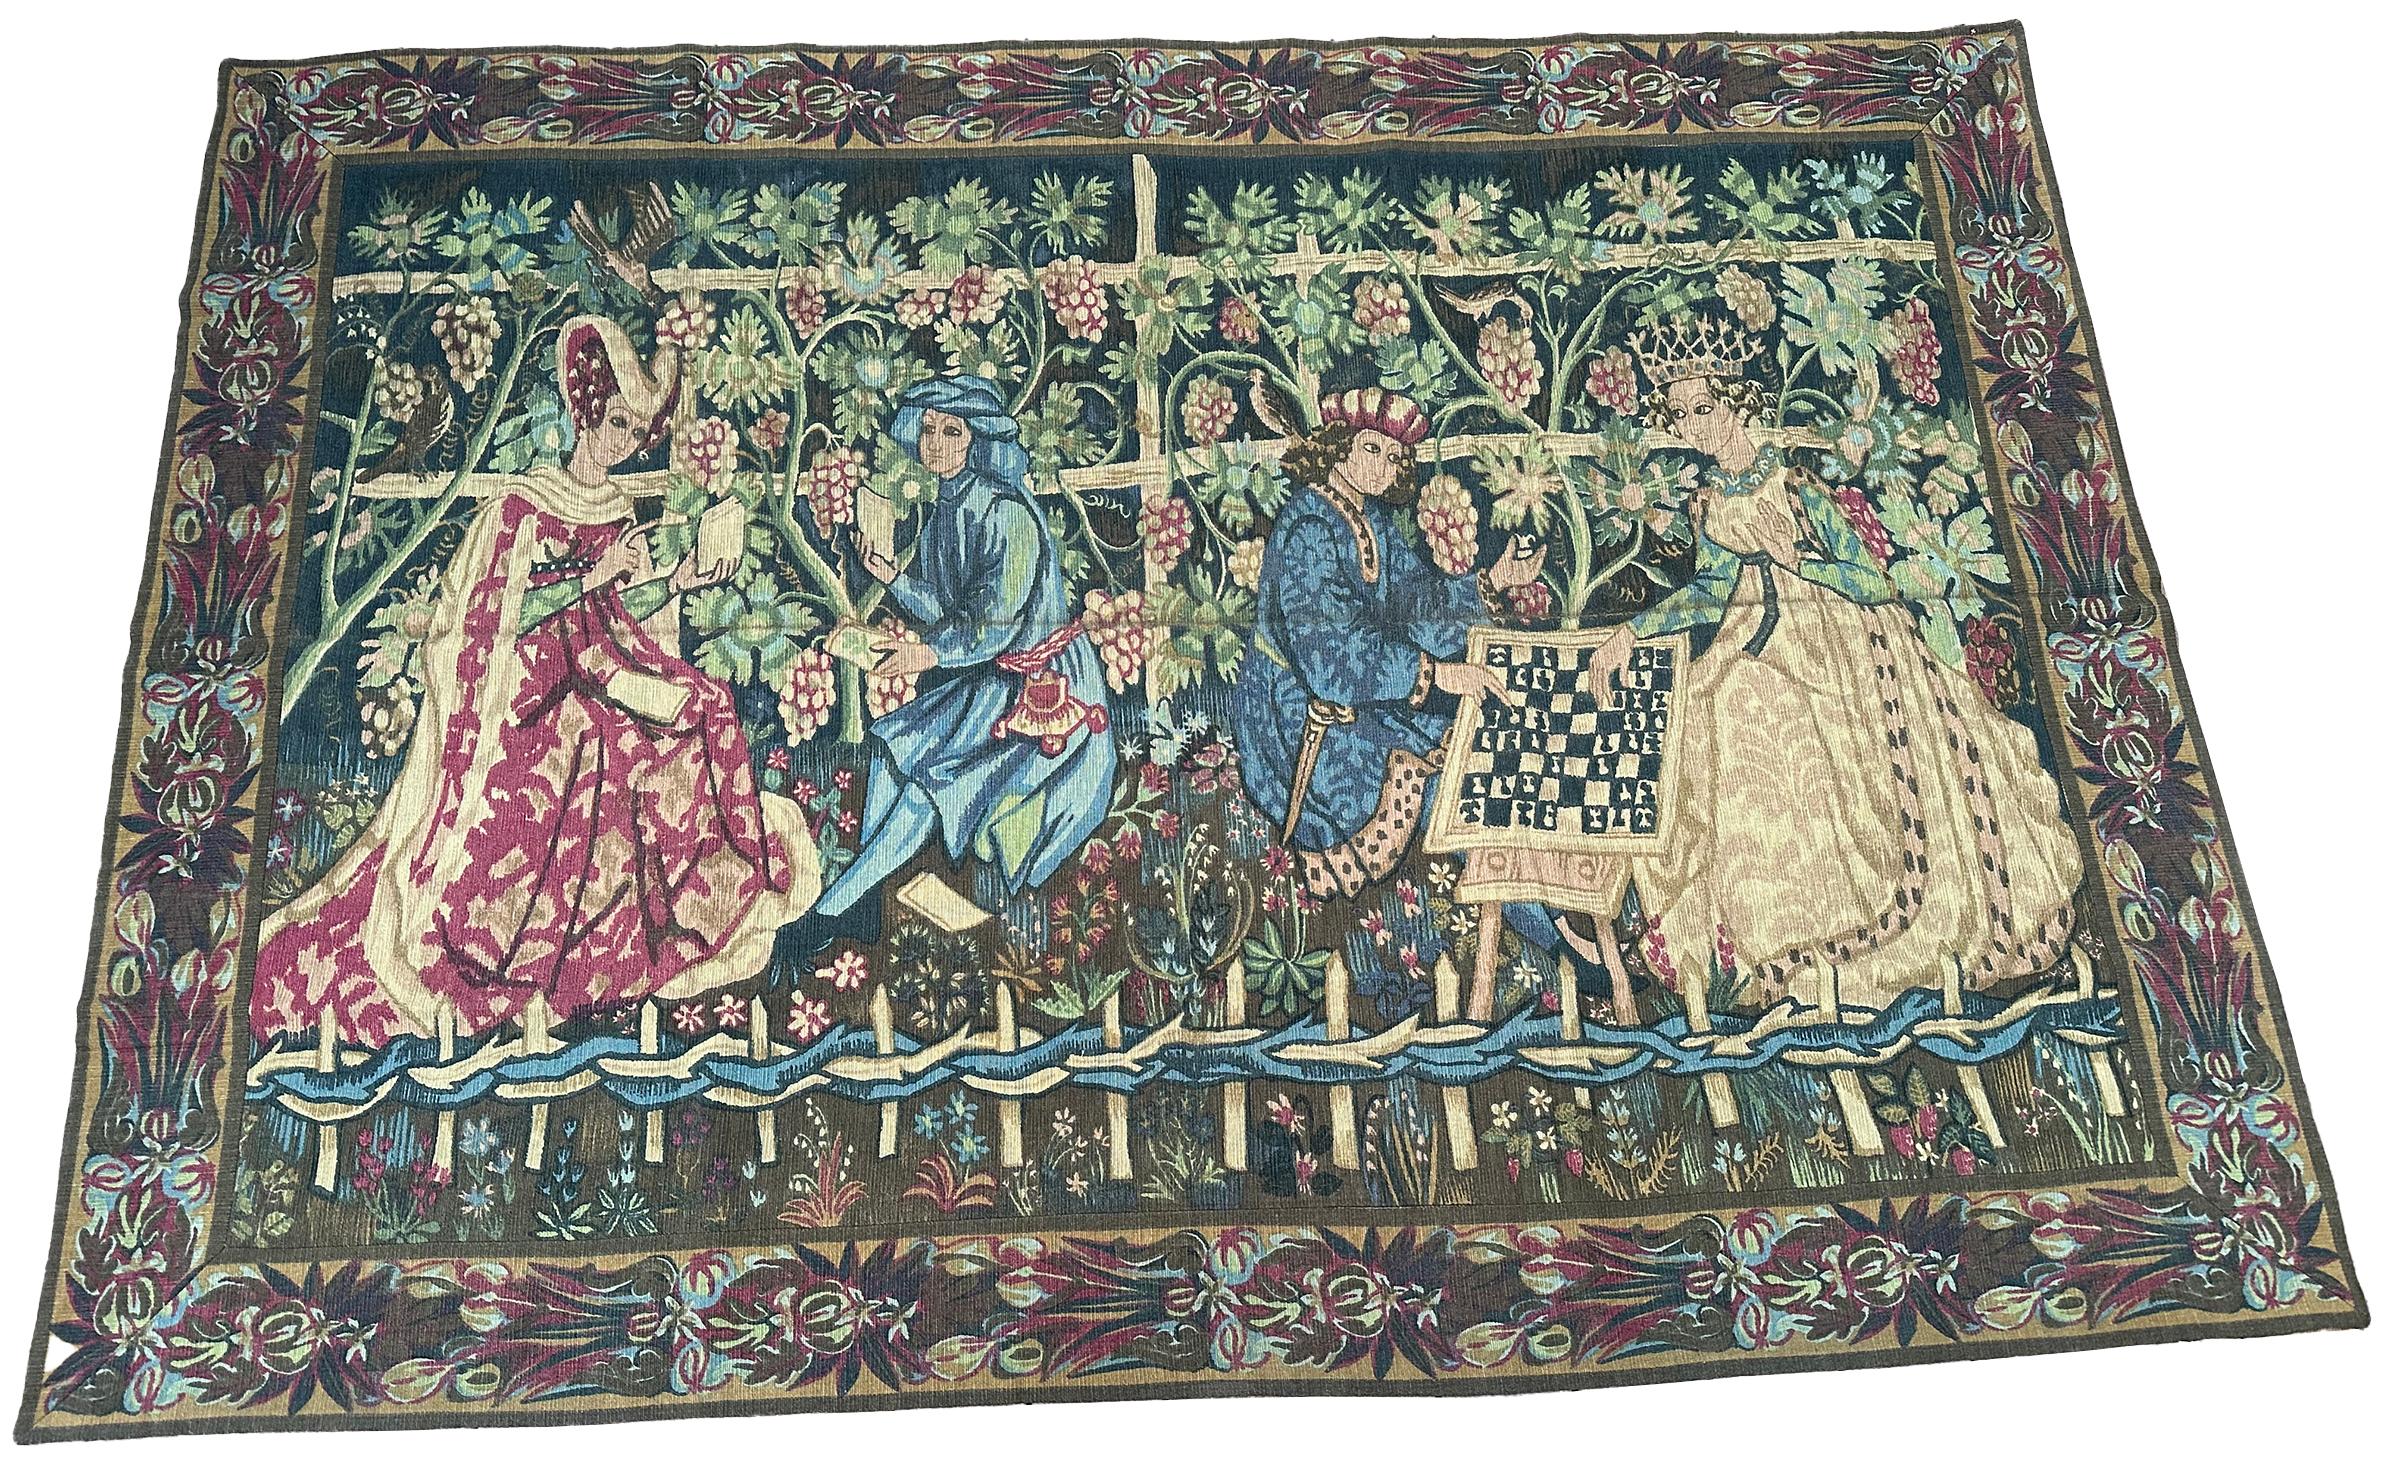 Antique French Tapestry Verdure Noblemen Royalty Verdure 5x9 158cm x 272cm 1920

A magnificent antique French tapestry depicting a scene of noblemen amongst incredible, exotic verdure and flowers. Beautiful colorway, and an easy, chic addition to